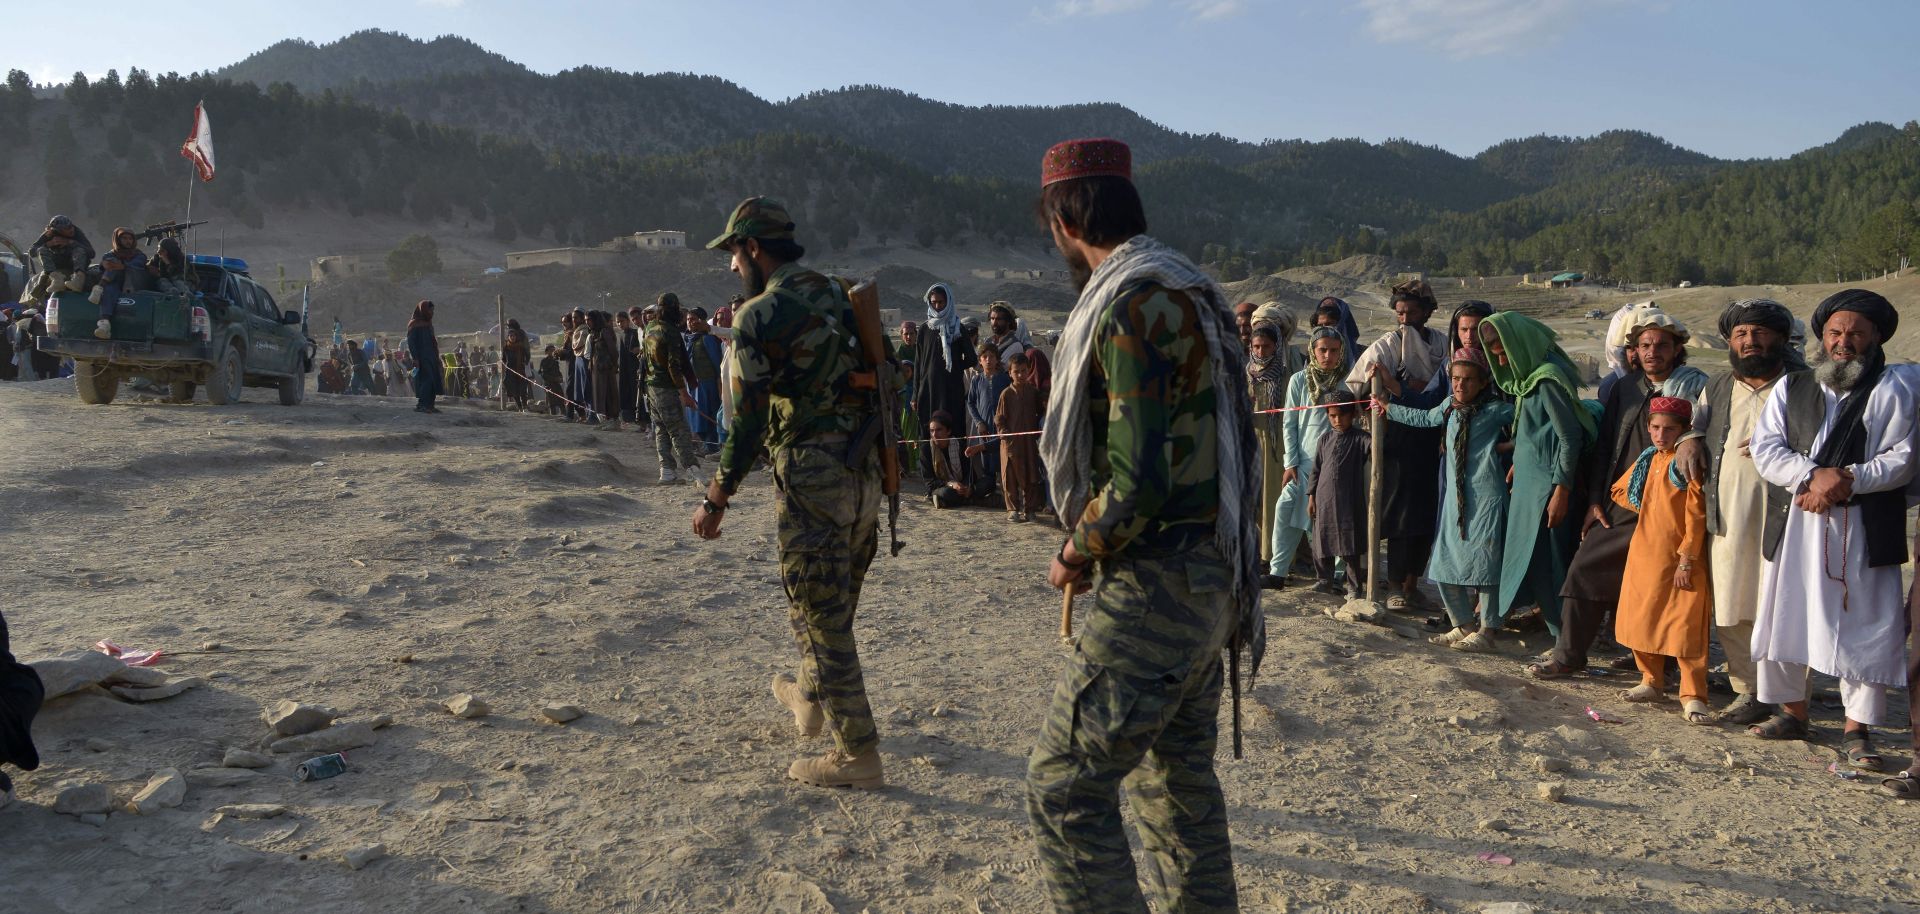 Taliban fighters stand guard on June 26, 2022, as people wait to receive aid in a village in Afghanistan’s Khost province after a recent earthquake.